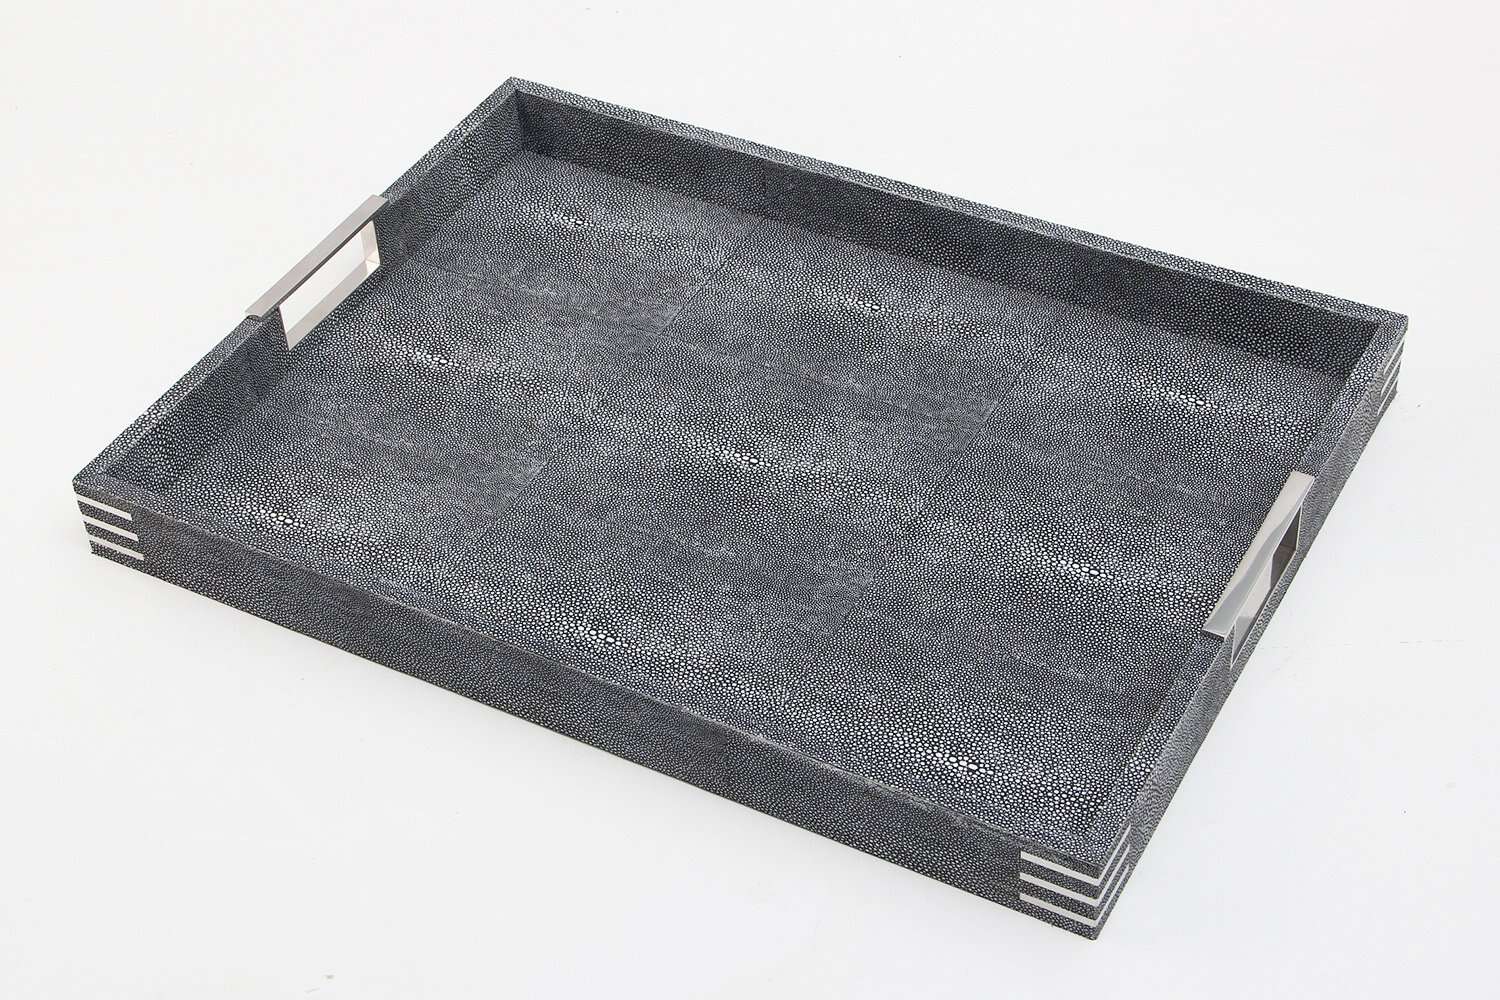 Charcoal drinks tray Shagreen serving tray Display tray